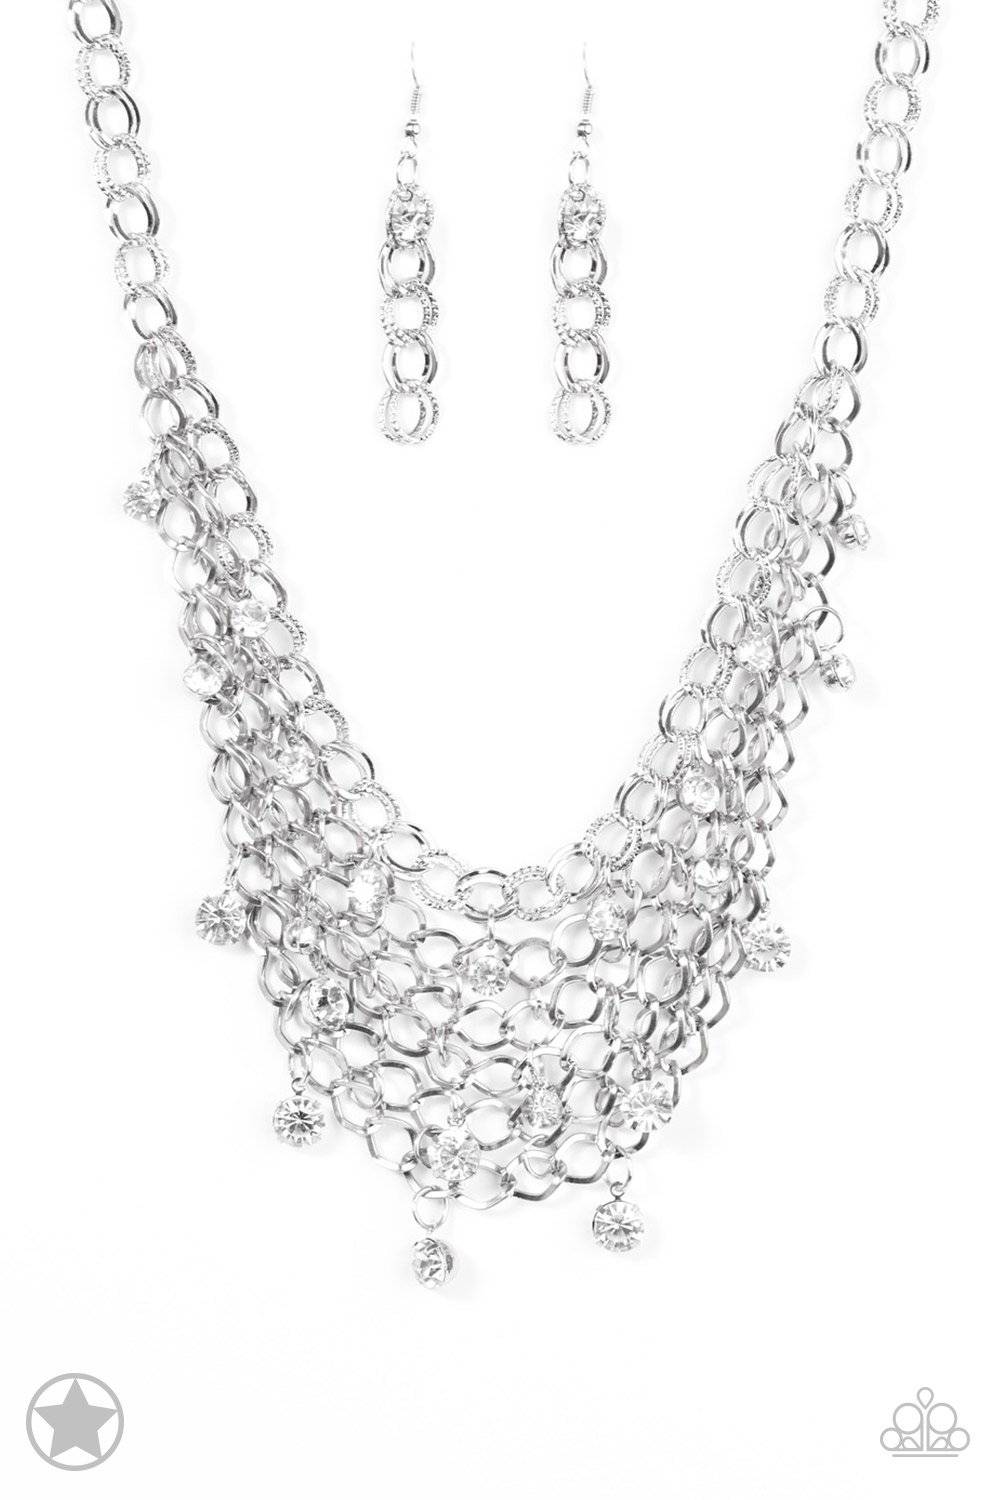 A205 - Fishing for Compliments Layered Necklace by Paparazzi Accessories on Fancy5Fashion.com